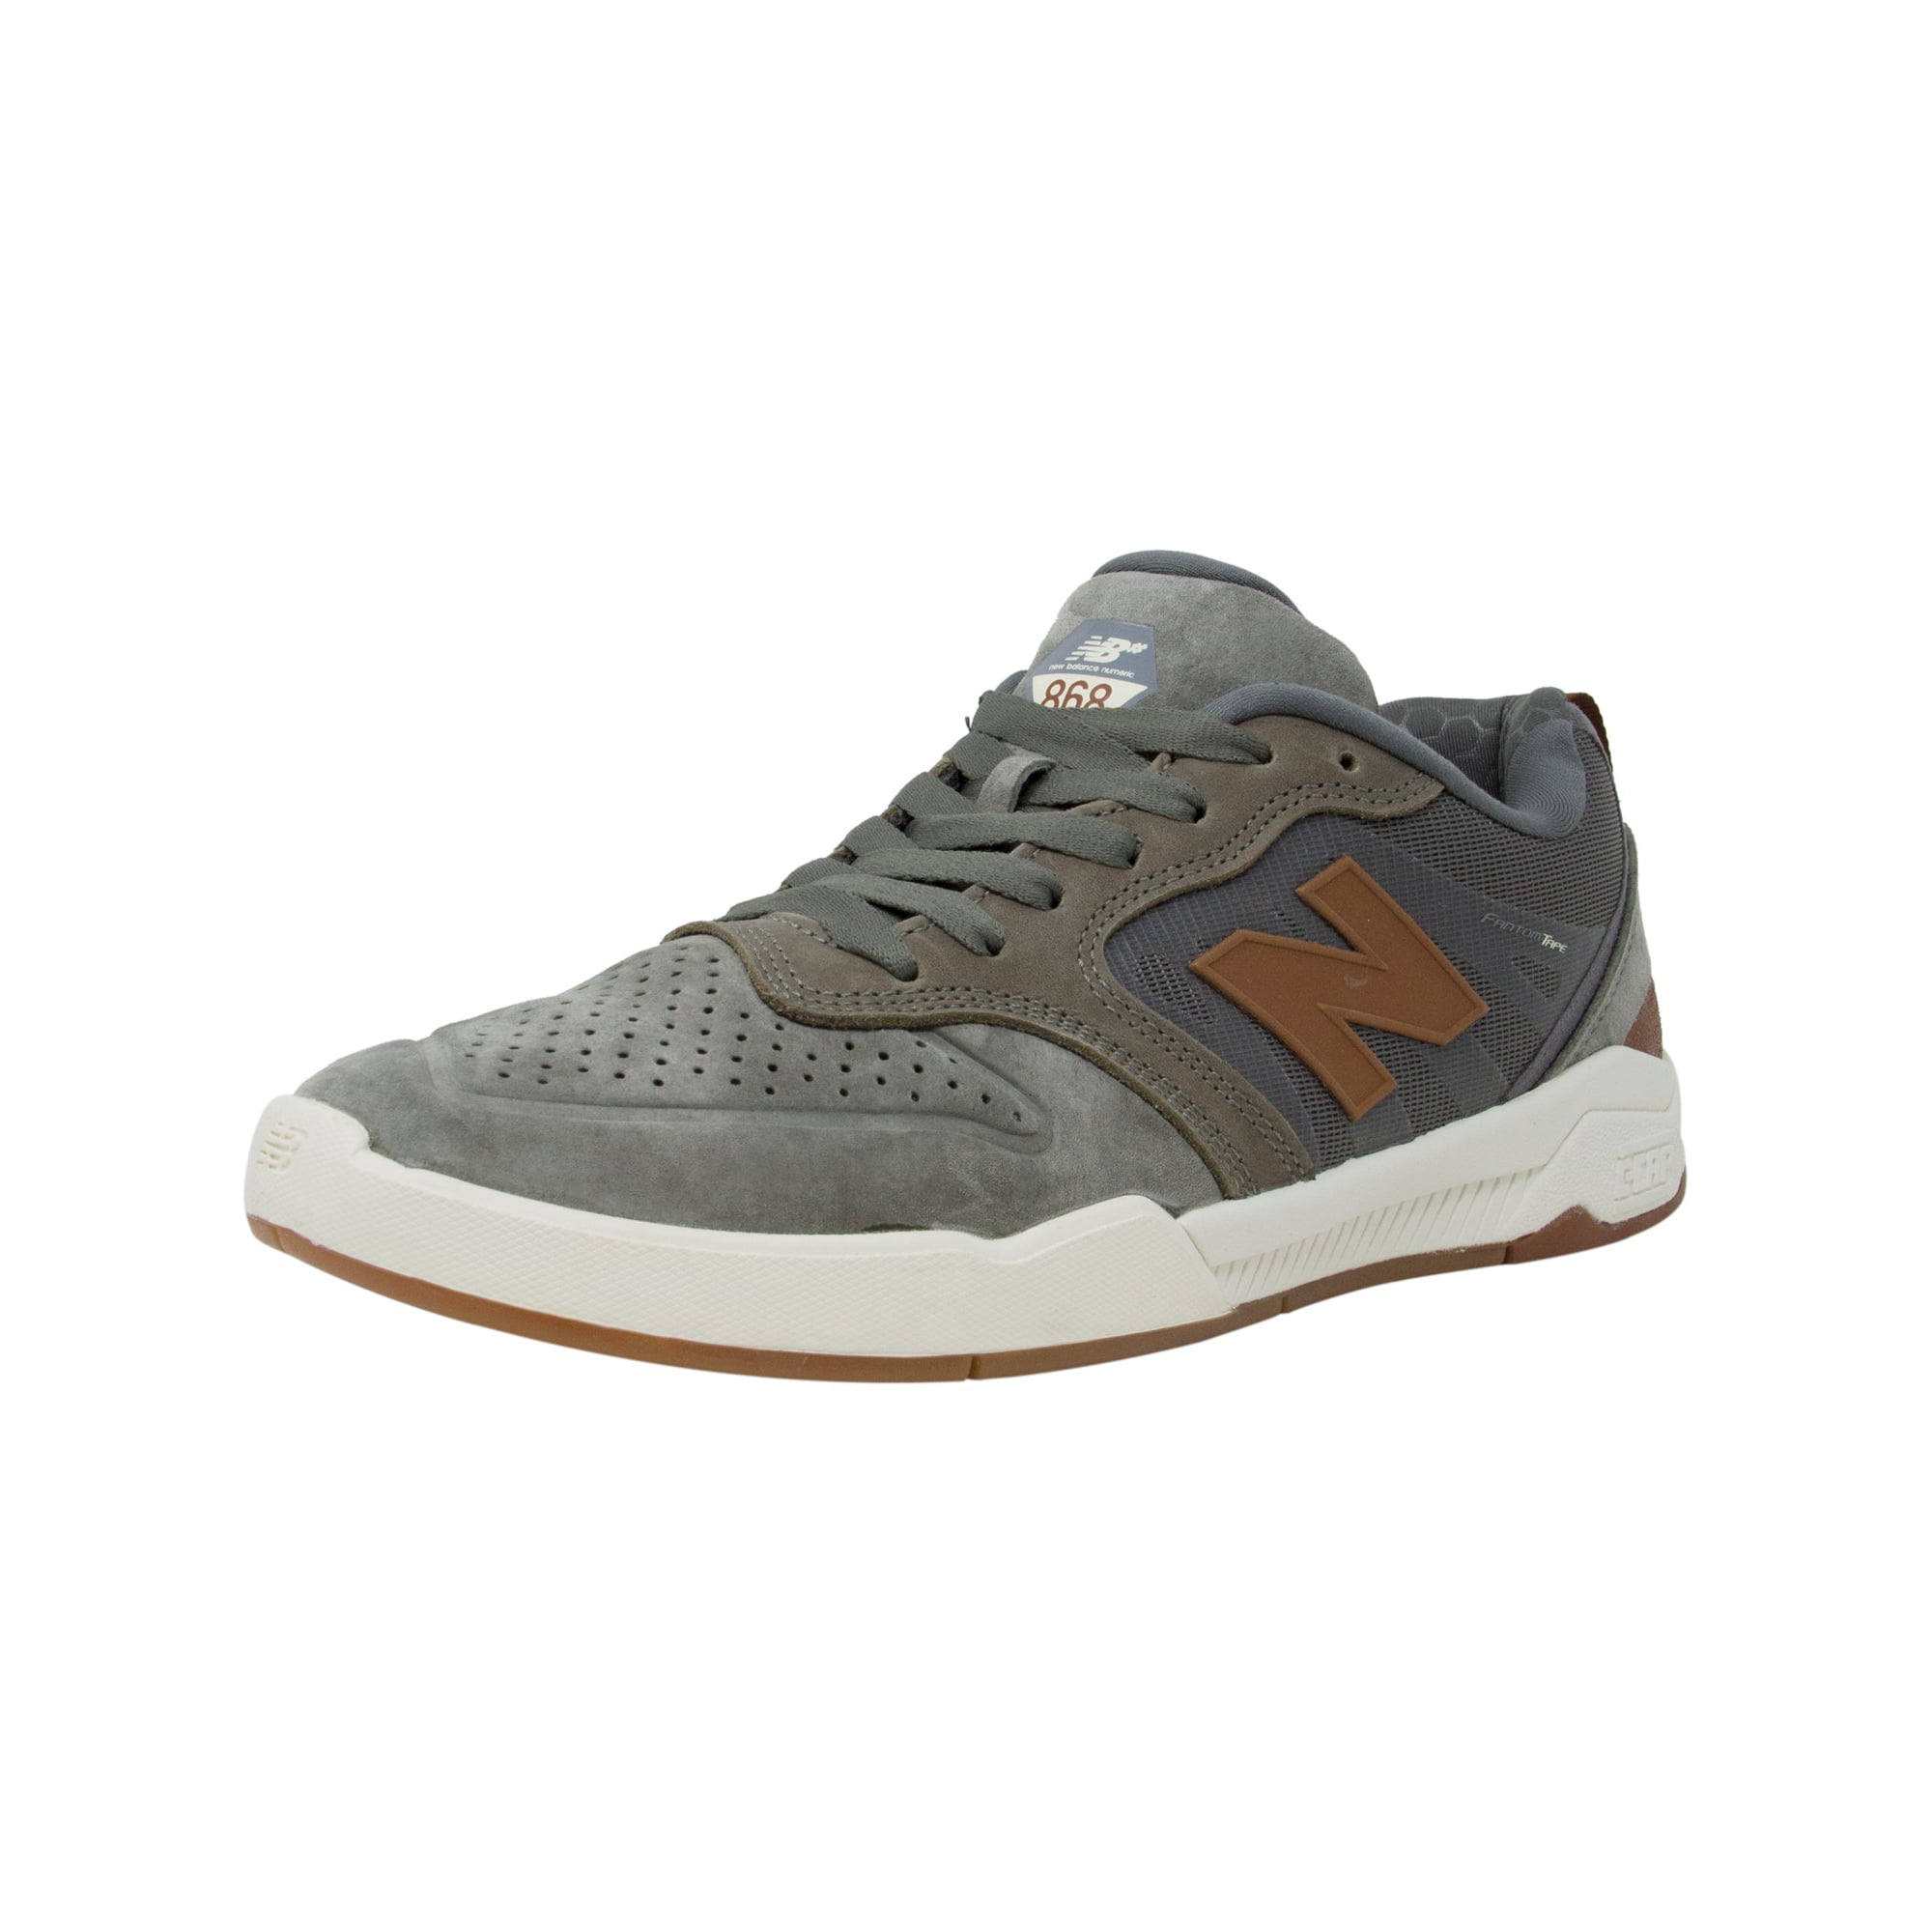 Independientemente Botánica Post impresionismo New Balance Men's Nm868 At Ankle-High Skateboarding Shoe - 8.5M | Walmart  Canada